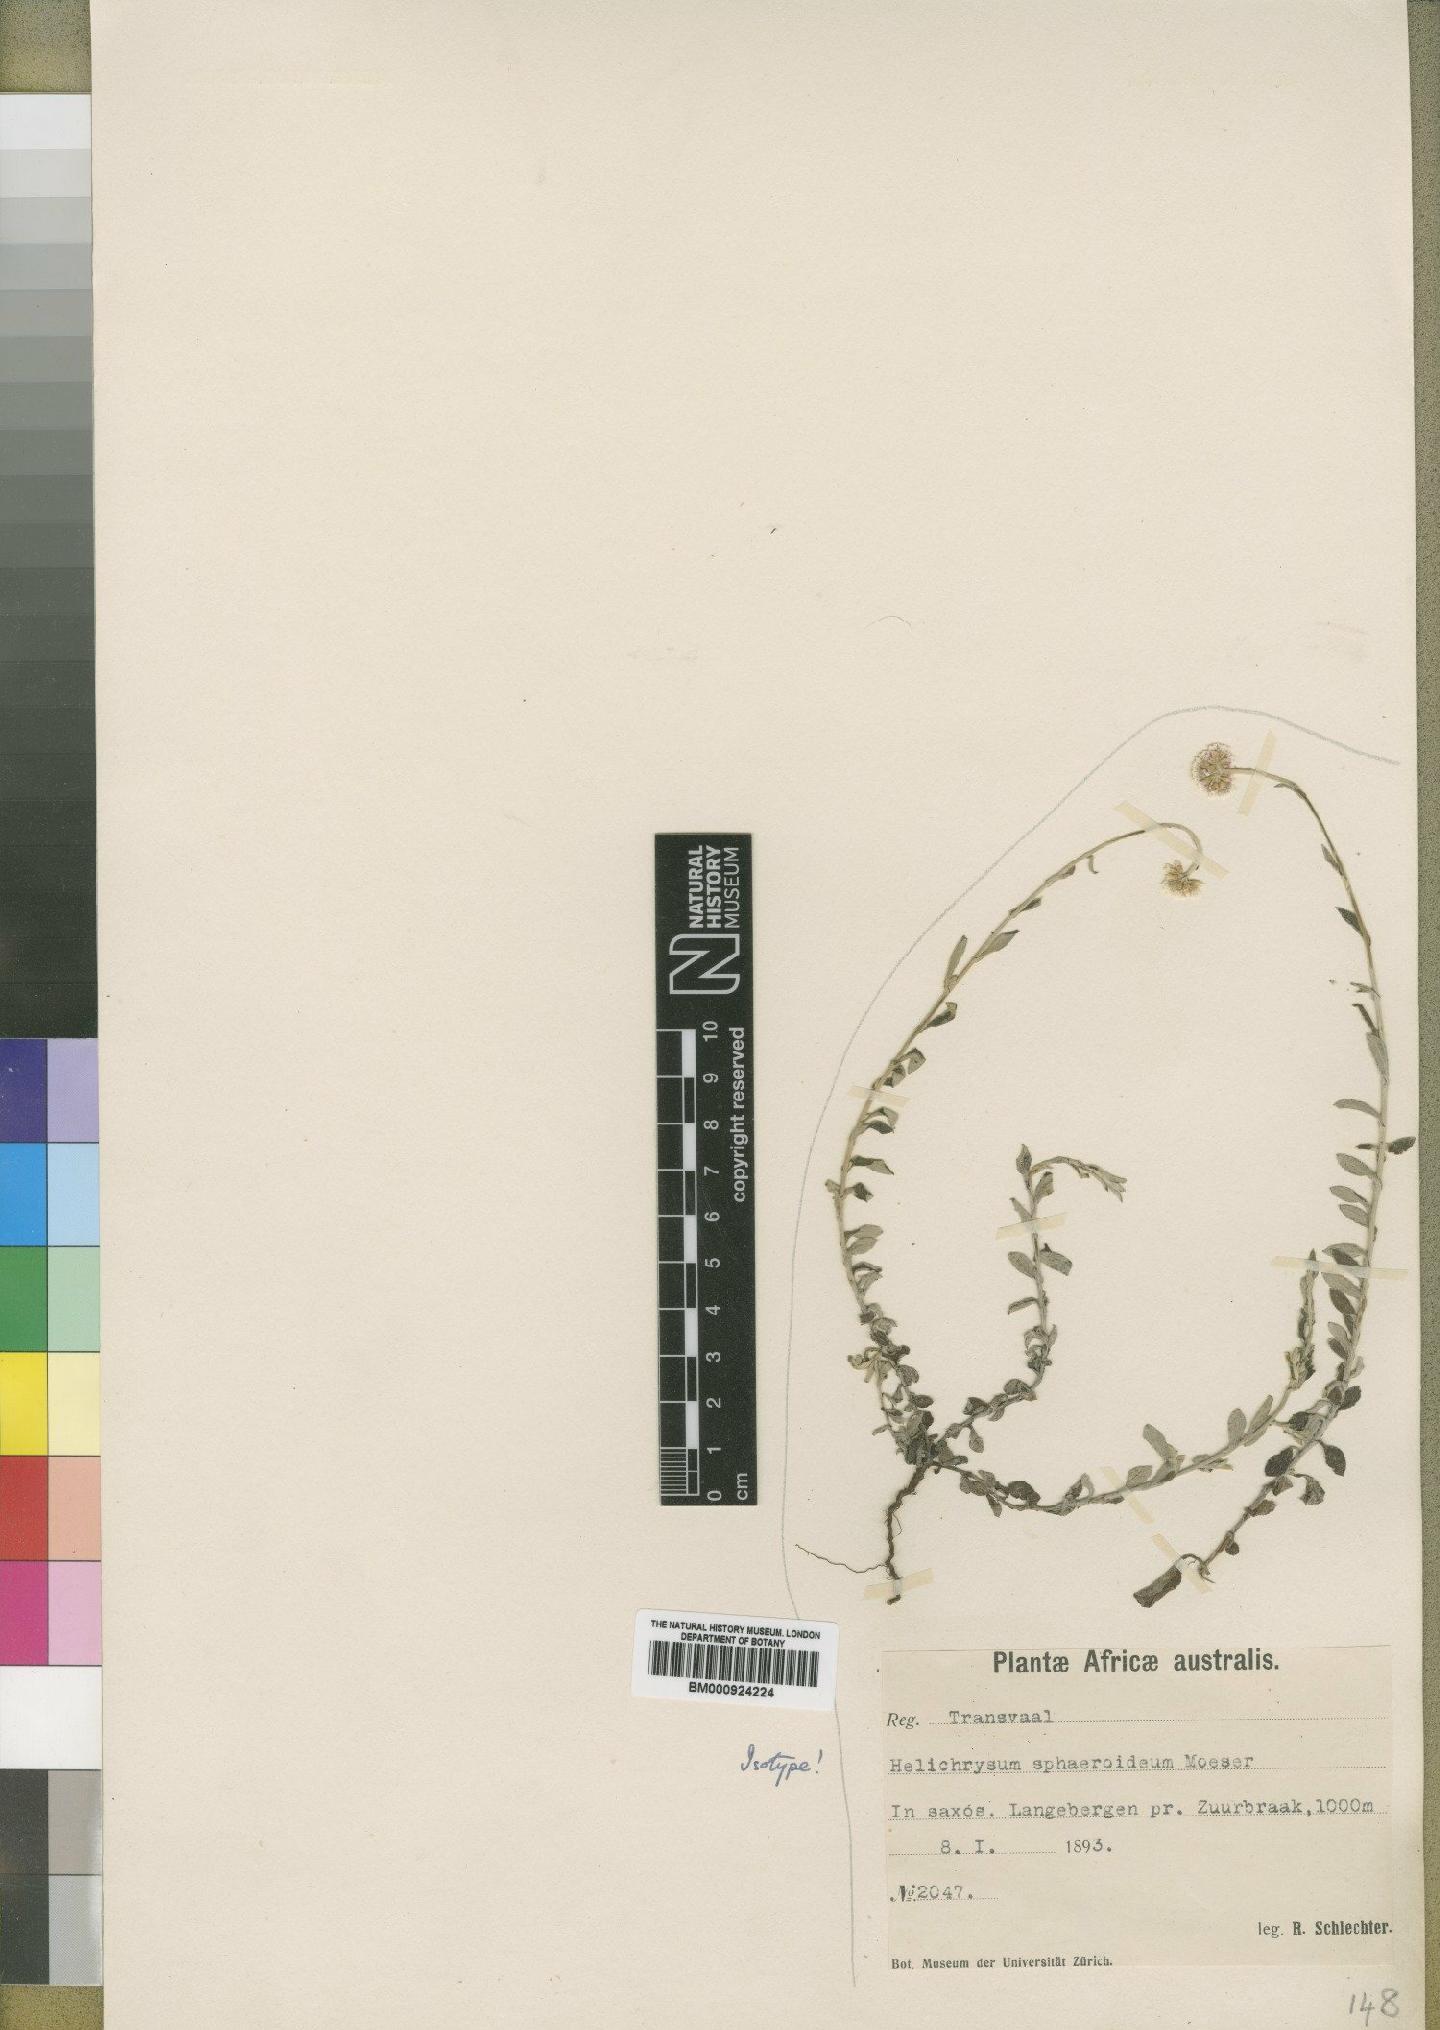 To NHMUK collection (Helichrysum sphaeroideum Moeser; Isotype; NHMUK:ecatalogue:4529252)